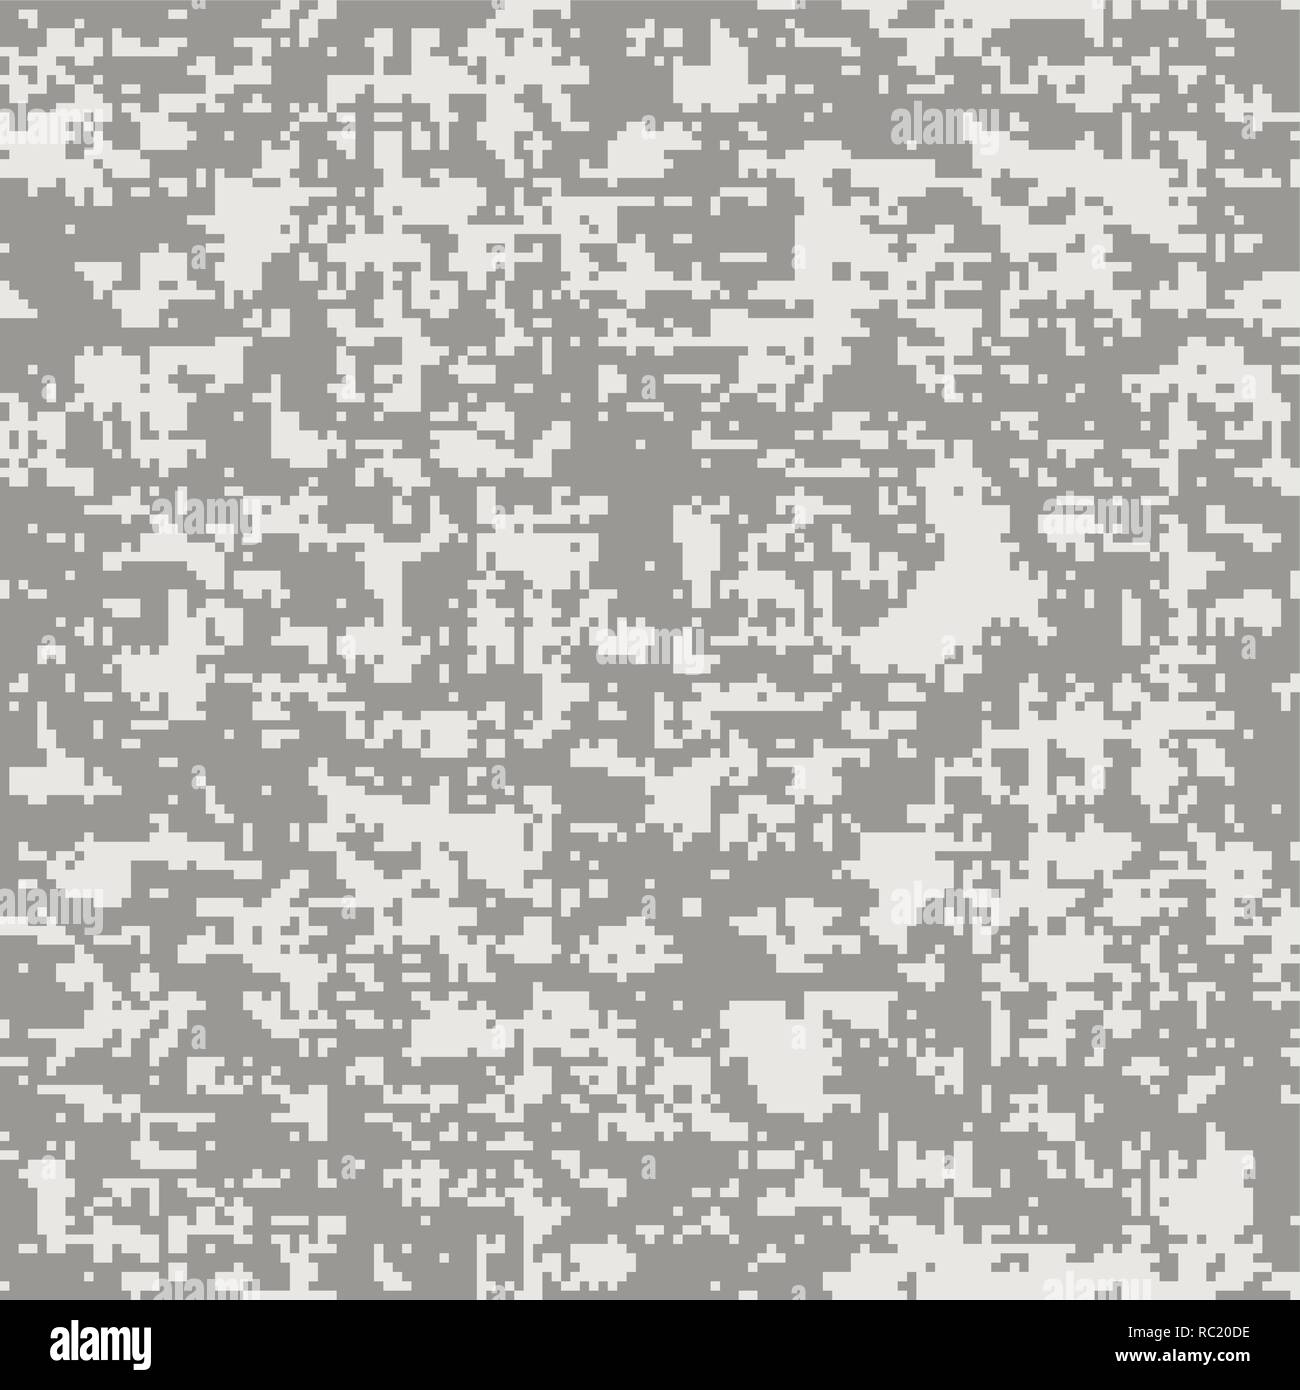 Digital camouflage seamless pattern. Abstract geometric military texture. Repeating modern stylish fabric textile background. Pixel Camo Fashion Stock Vector